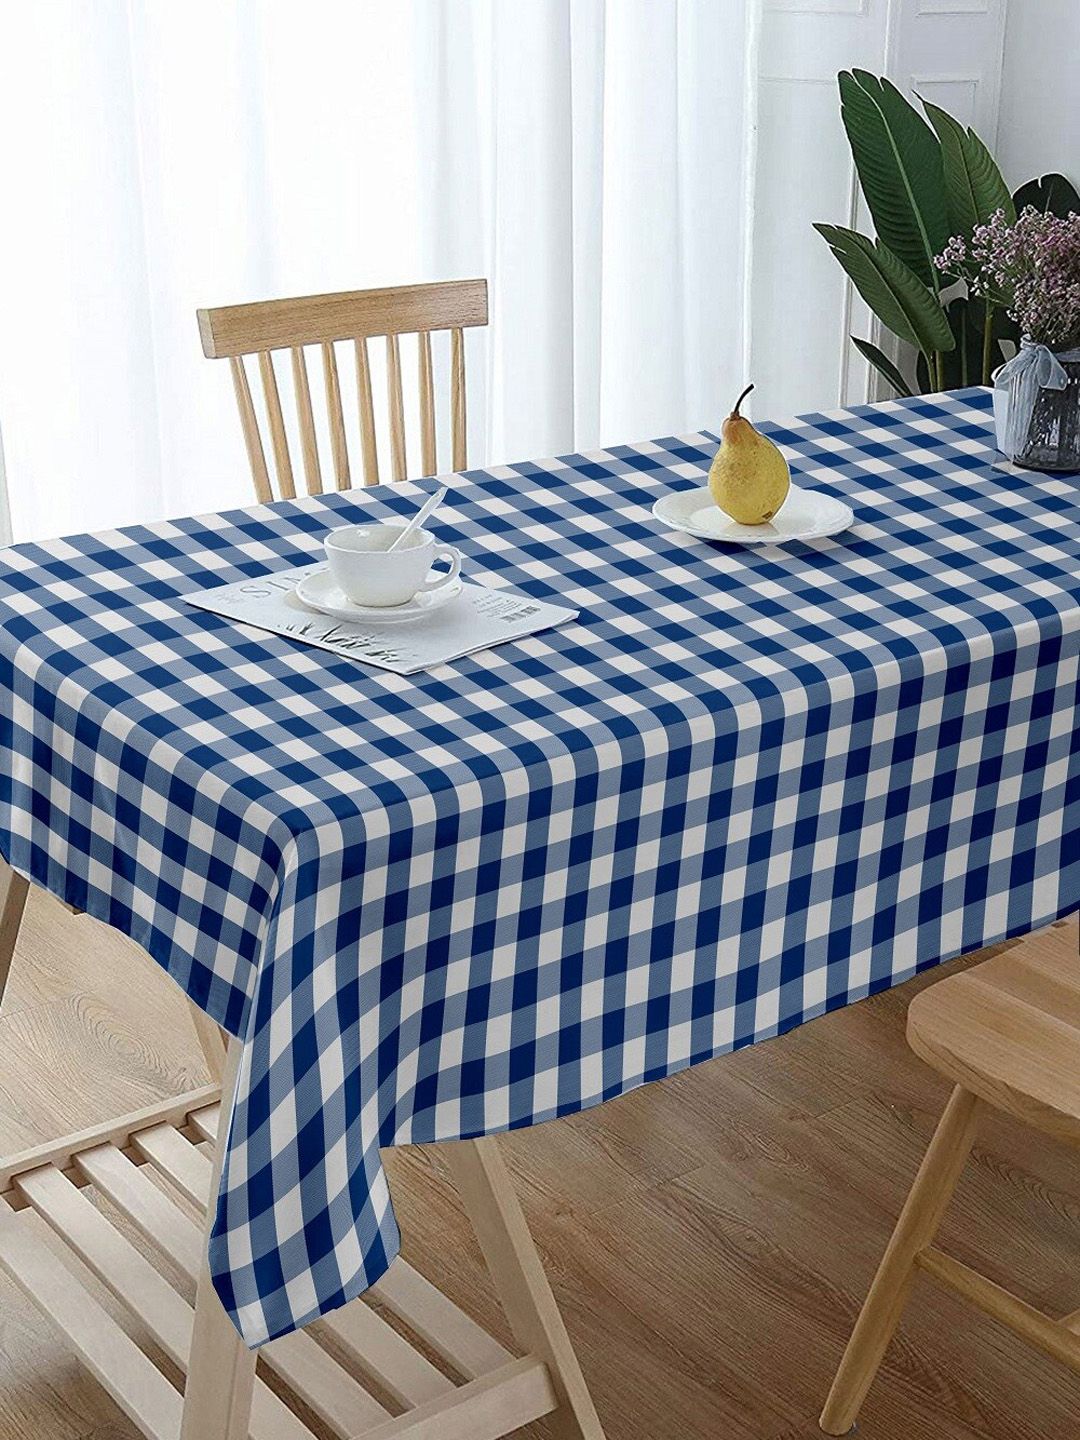 Lushomes White & Blue Checked Cotton 6-Seater Rectangle Table Cover Price in India